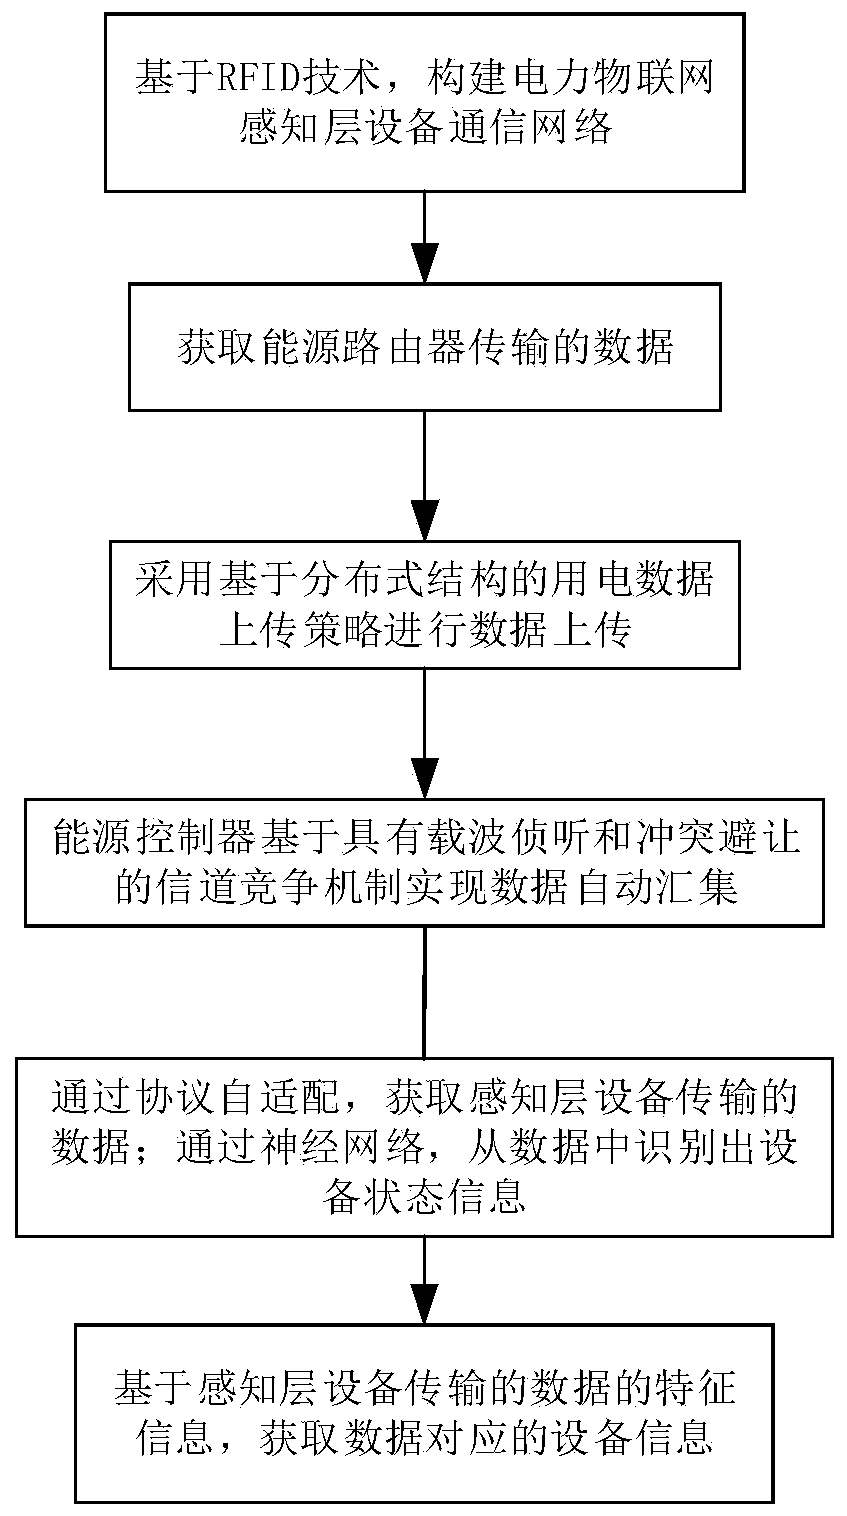 Local data processing method of electricity consumption information acquisition system